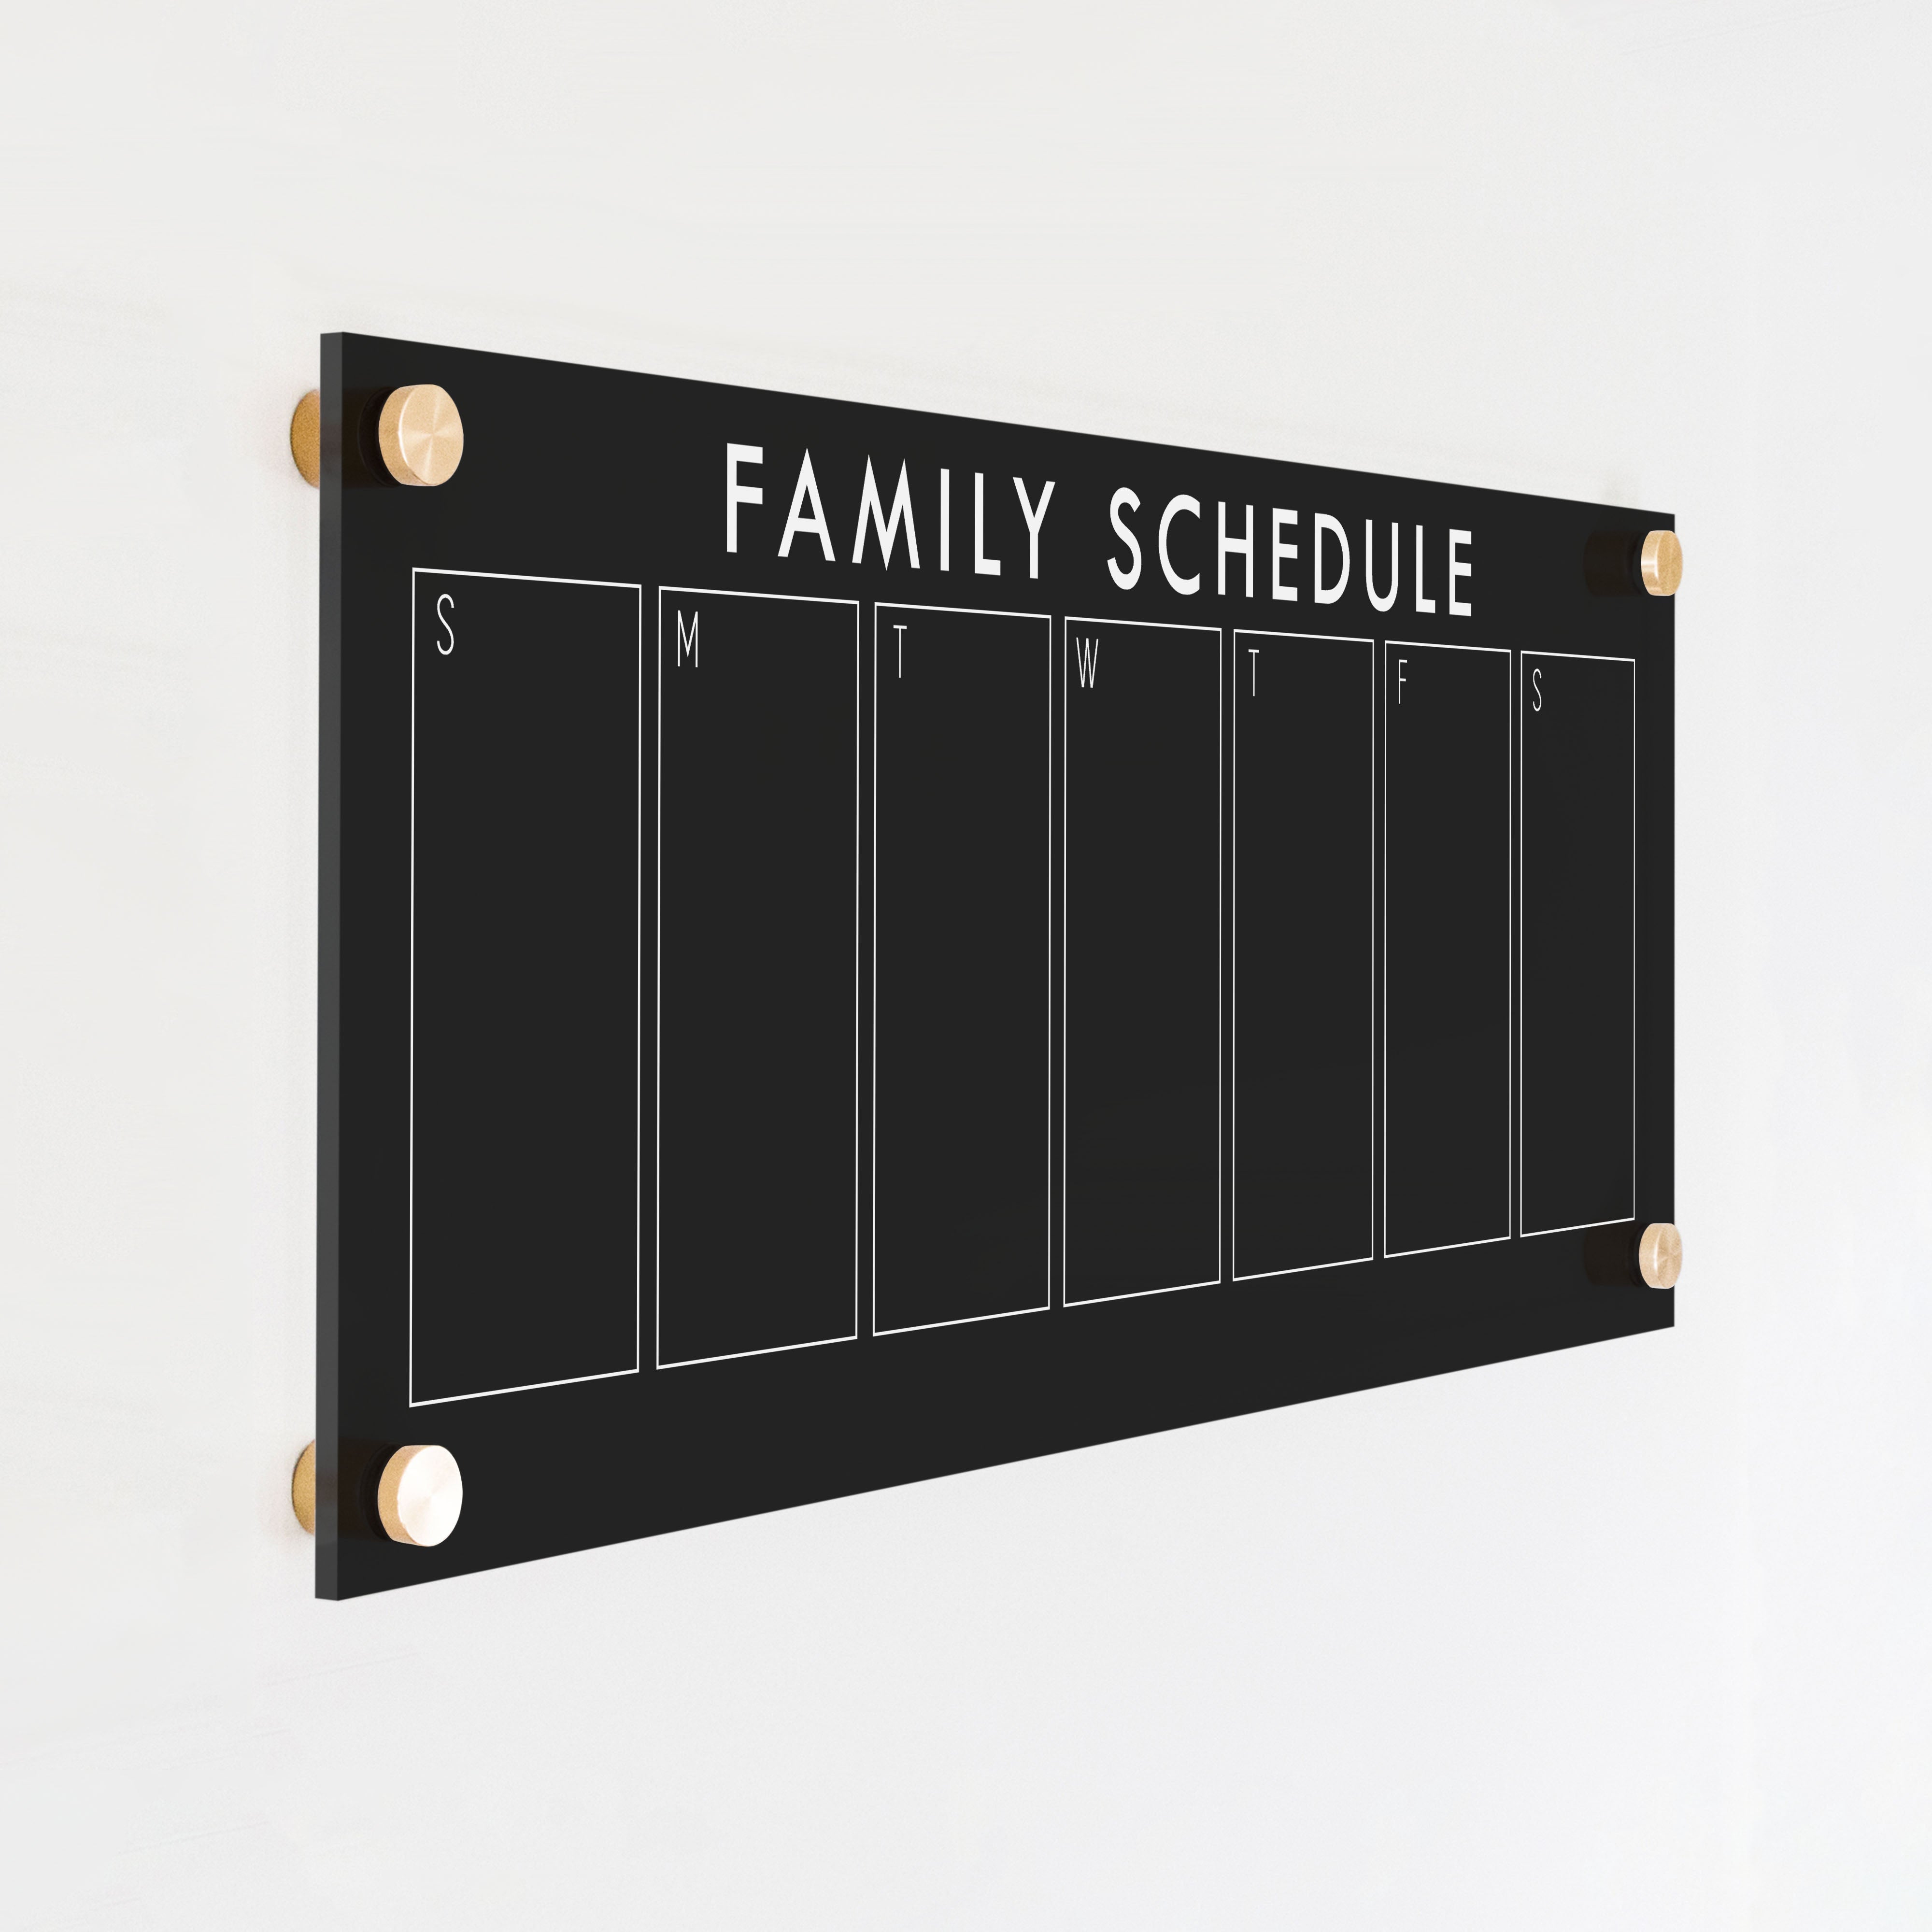 A skinny dry-erase weekly calender made of acrylic hanging on the wall